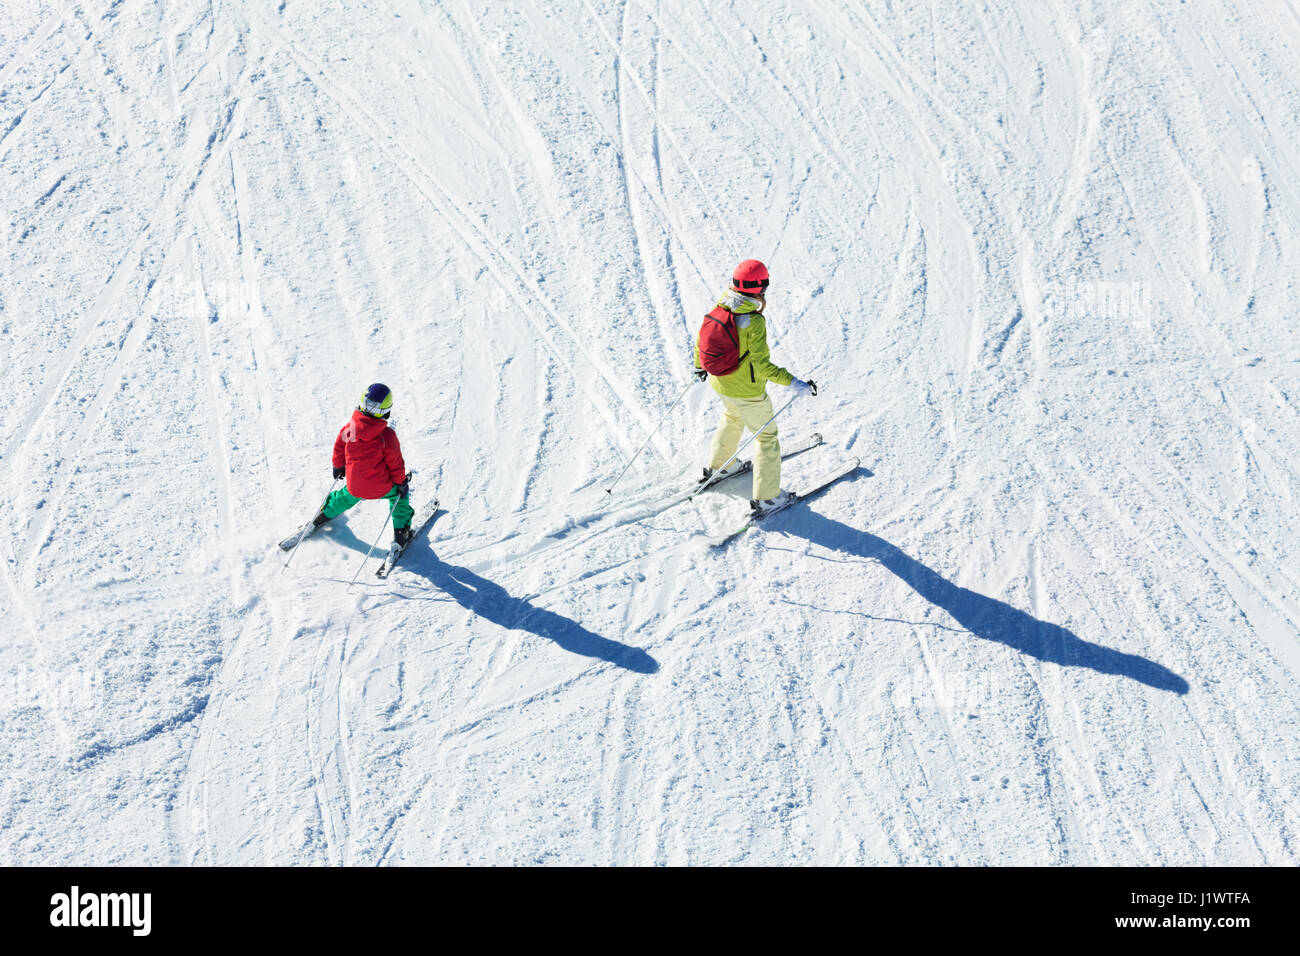 Top view portrait of active woman and her kid son skiing at snow-capped mountains Stock Photo